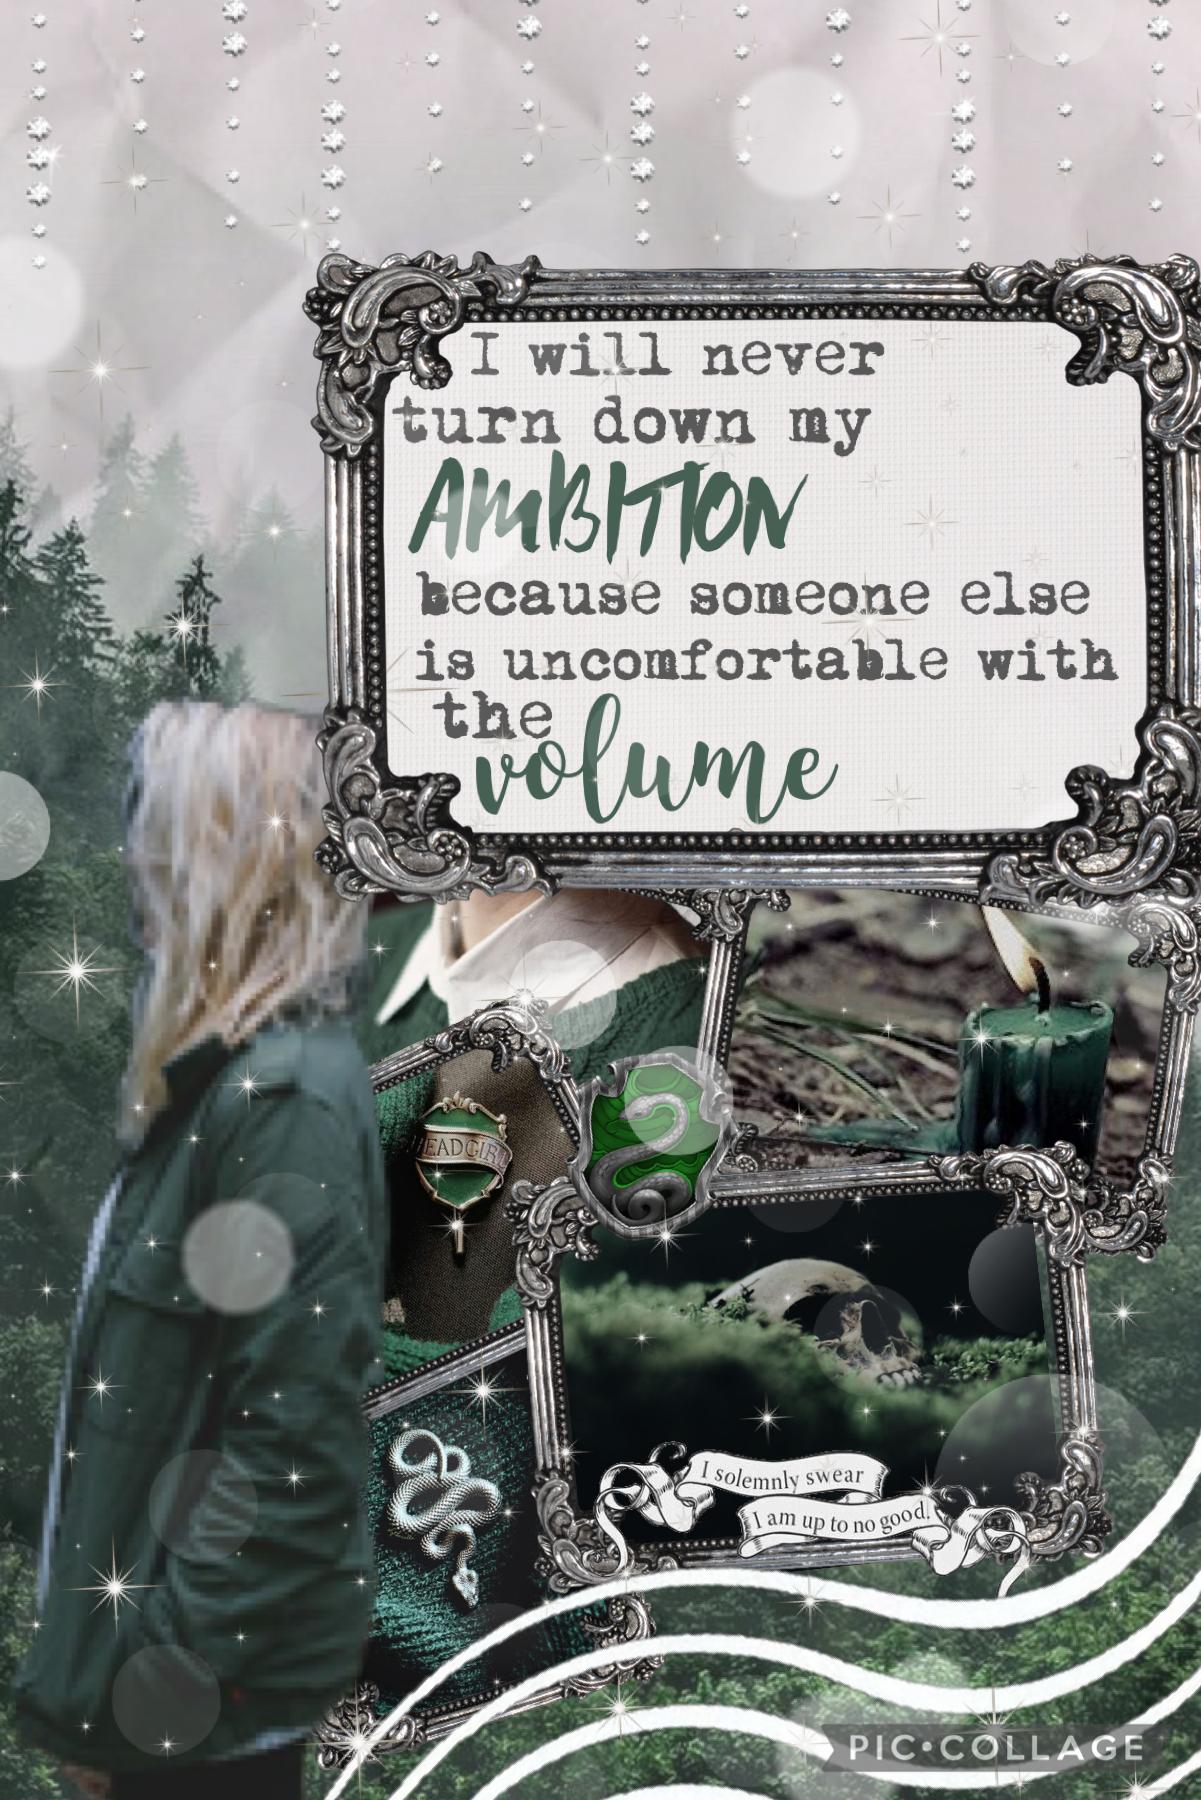 🌲11.22.2021 (please tap)🌲
Qotd; what’s your worst trait and your best trait?
Aotd: My worst and best trait is my ambition. I either go big enough to succeed or to big and fail miserably
Have a great day y’all 🤍